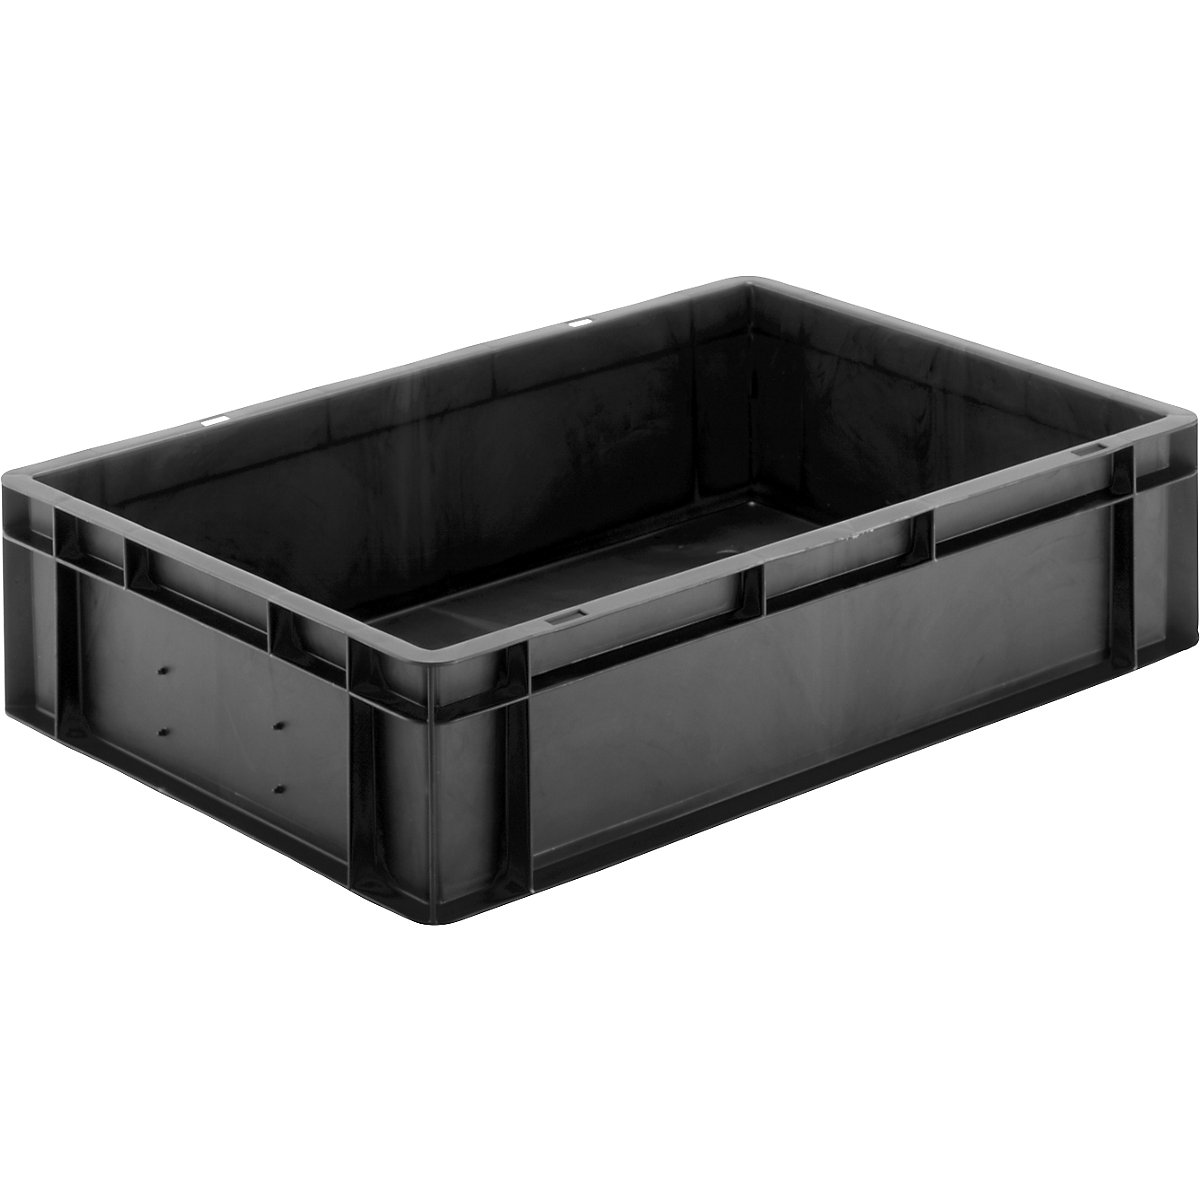 ESD stacking container, made of polypropylene, LxWxH 600 x 400 x 175 mm, pack of 2-8